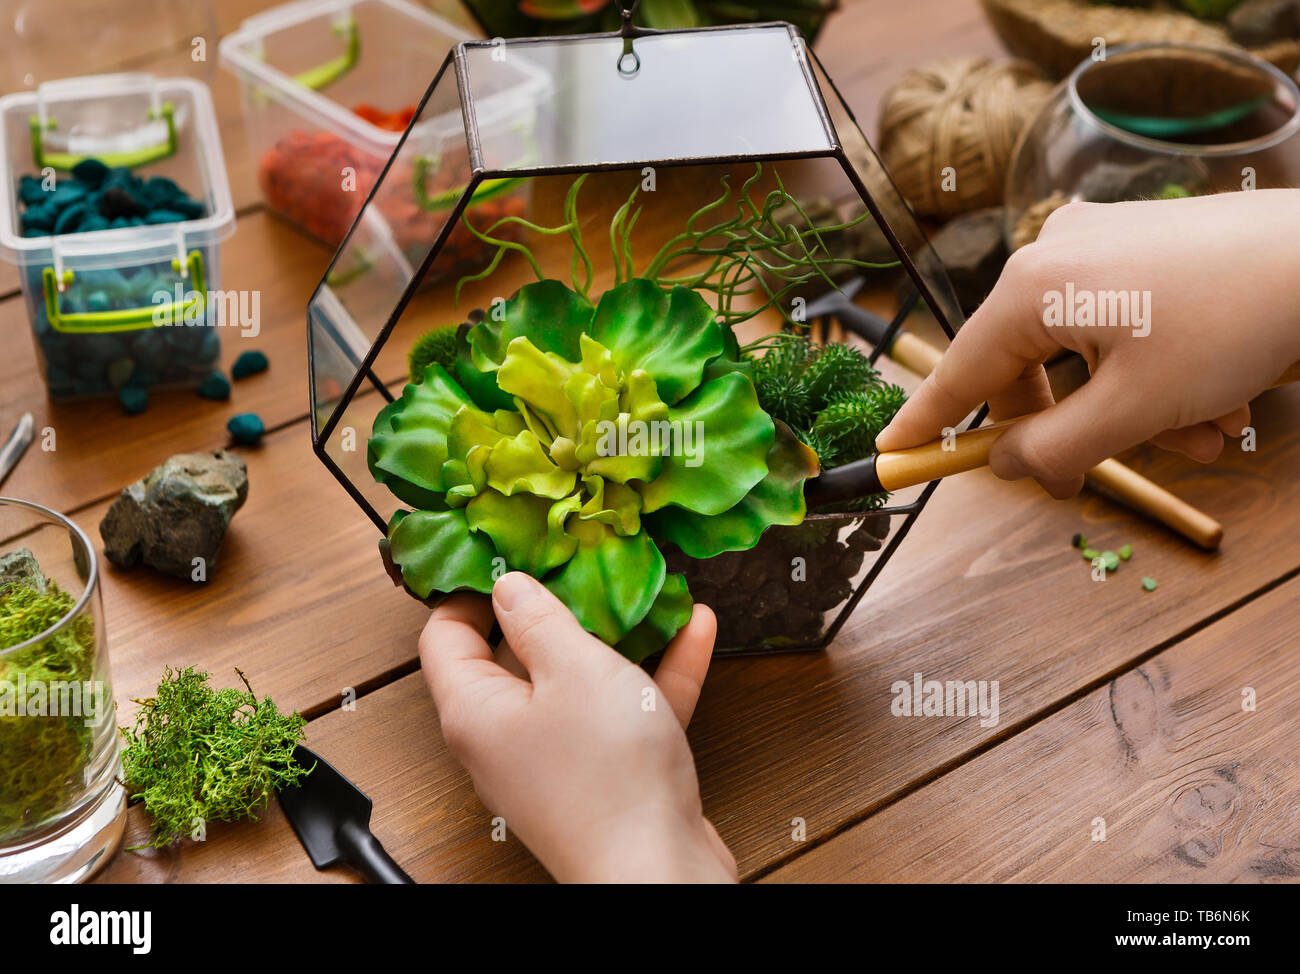 Woman transplanting plants in glass florarium with various tools on table. Home gardening concept Stock Photo